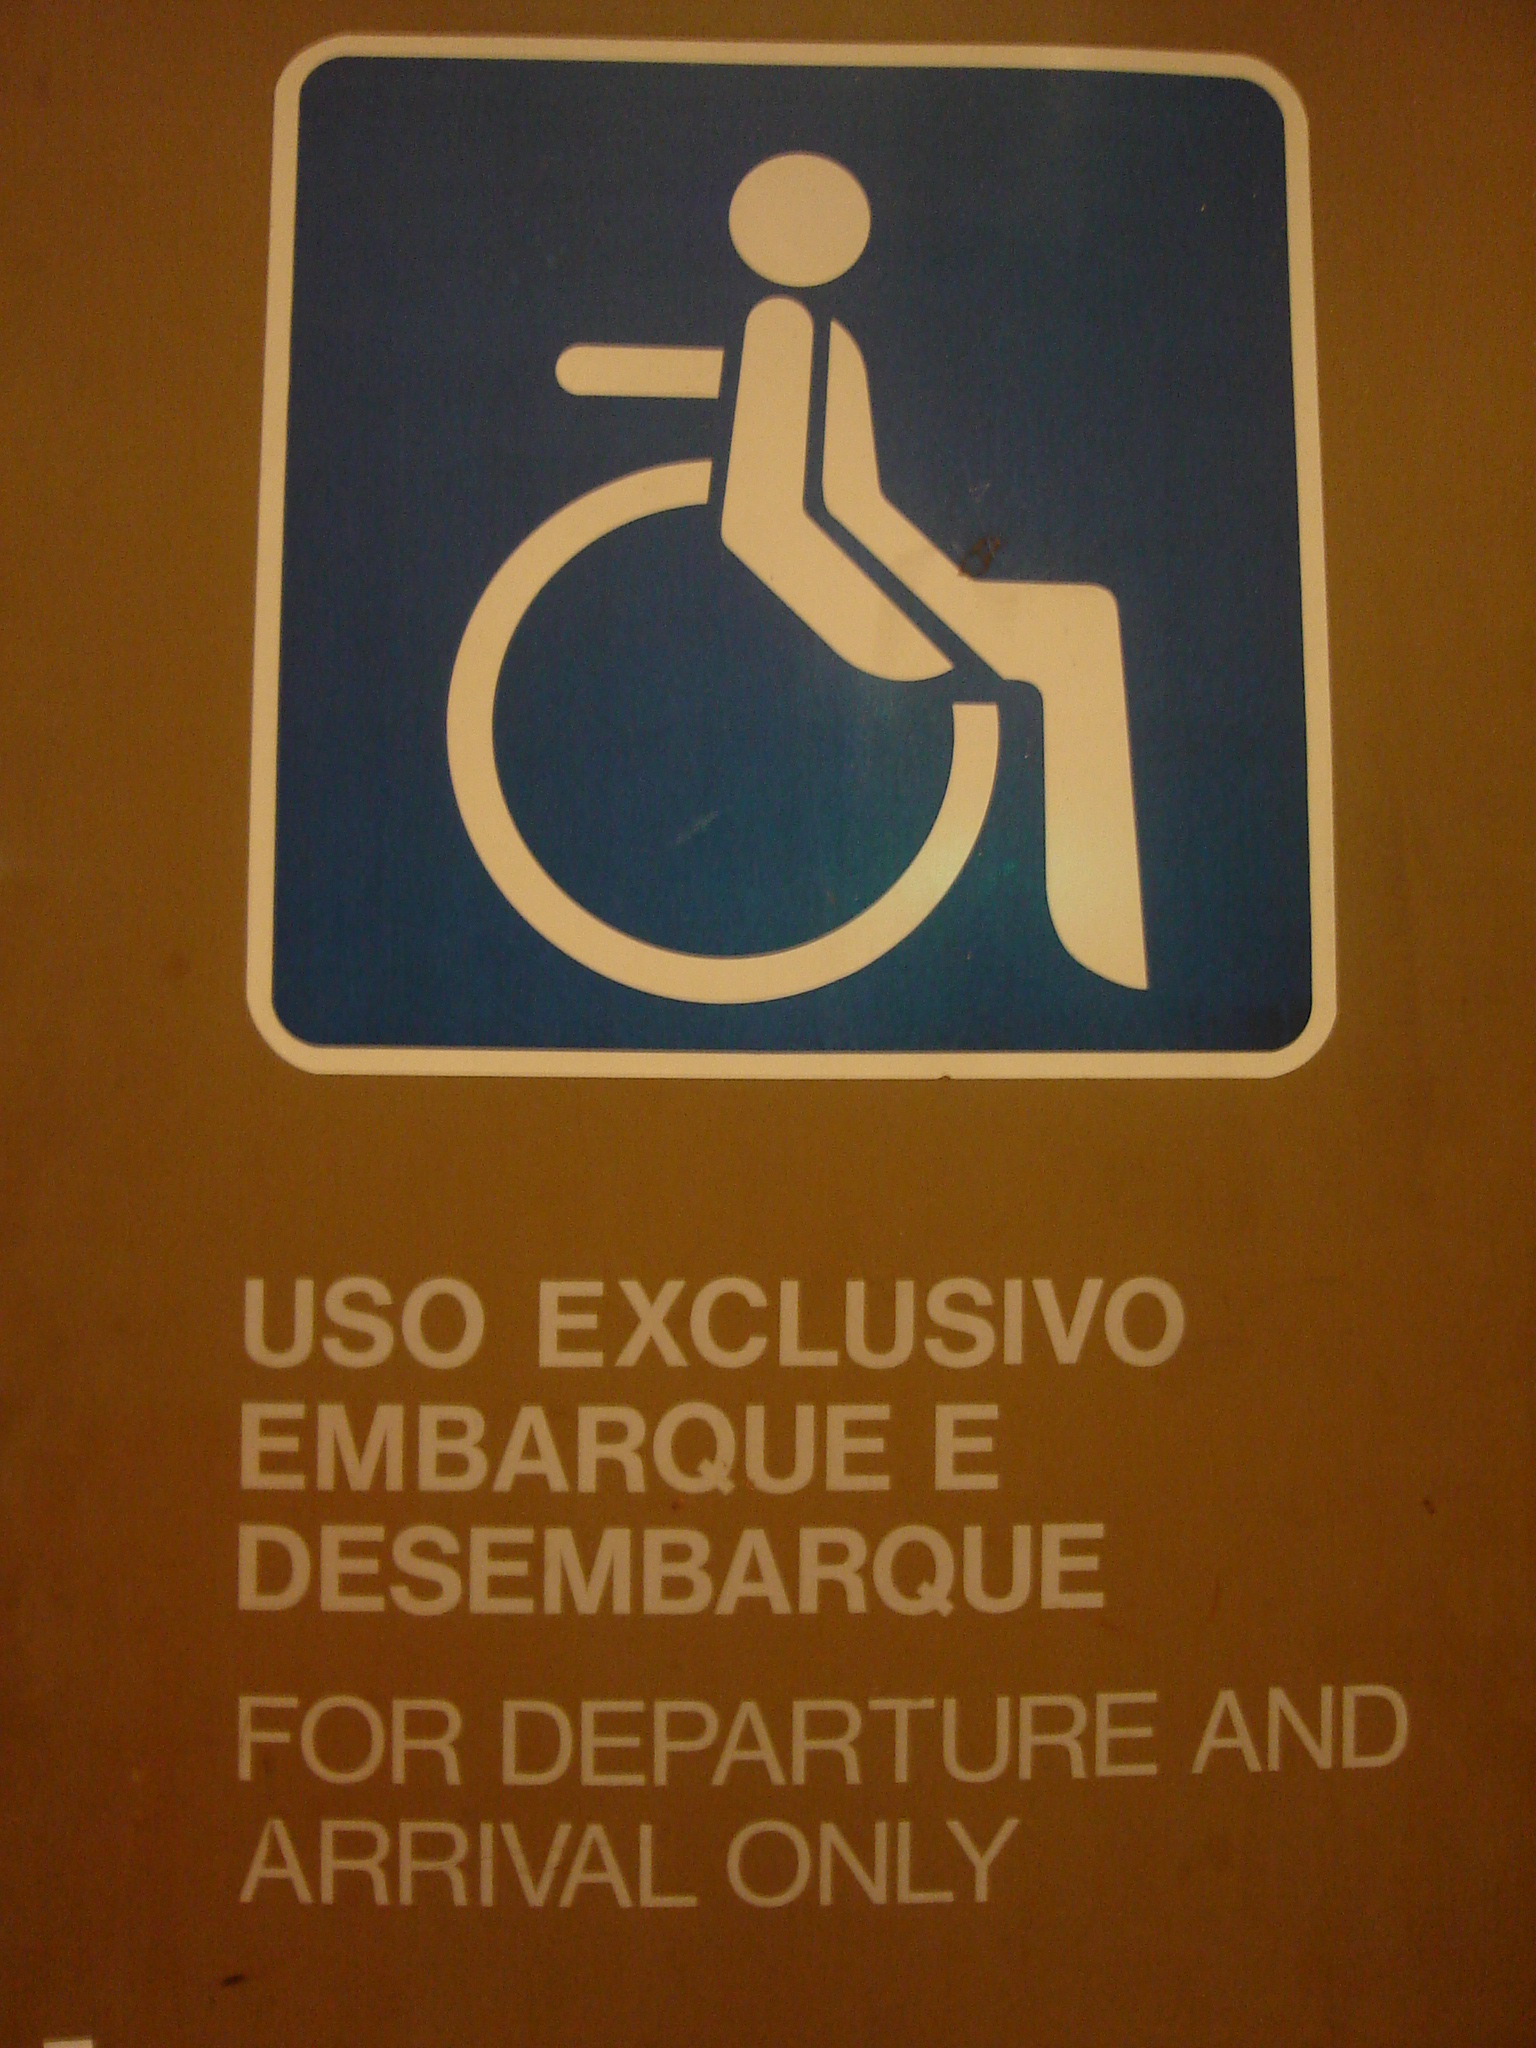 poows wheelchair sign disabled for departure and arrival only